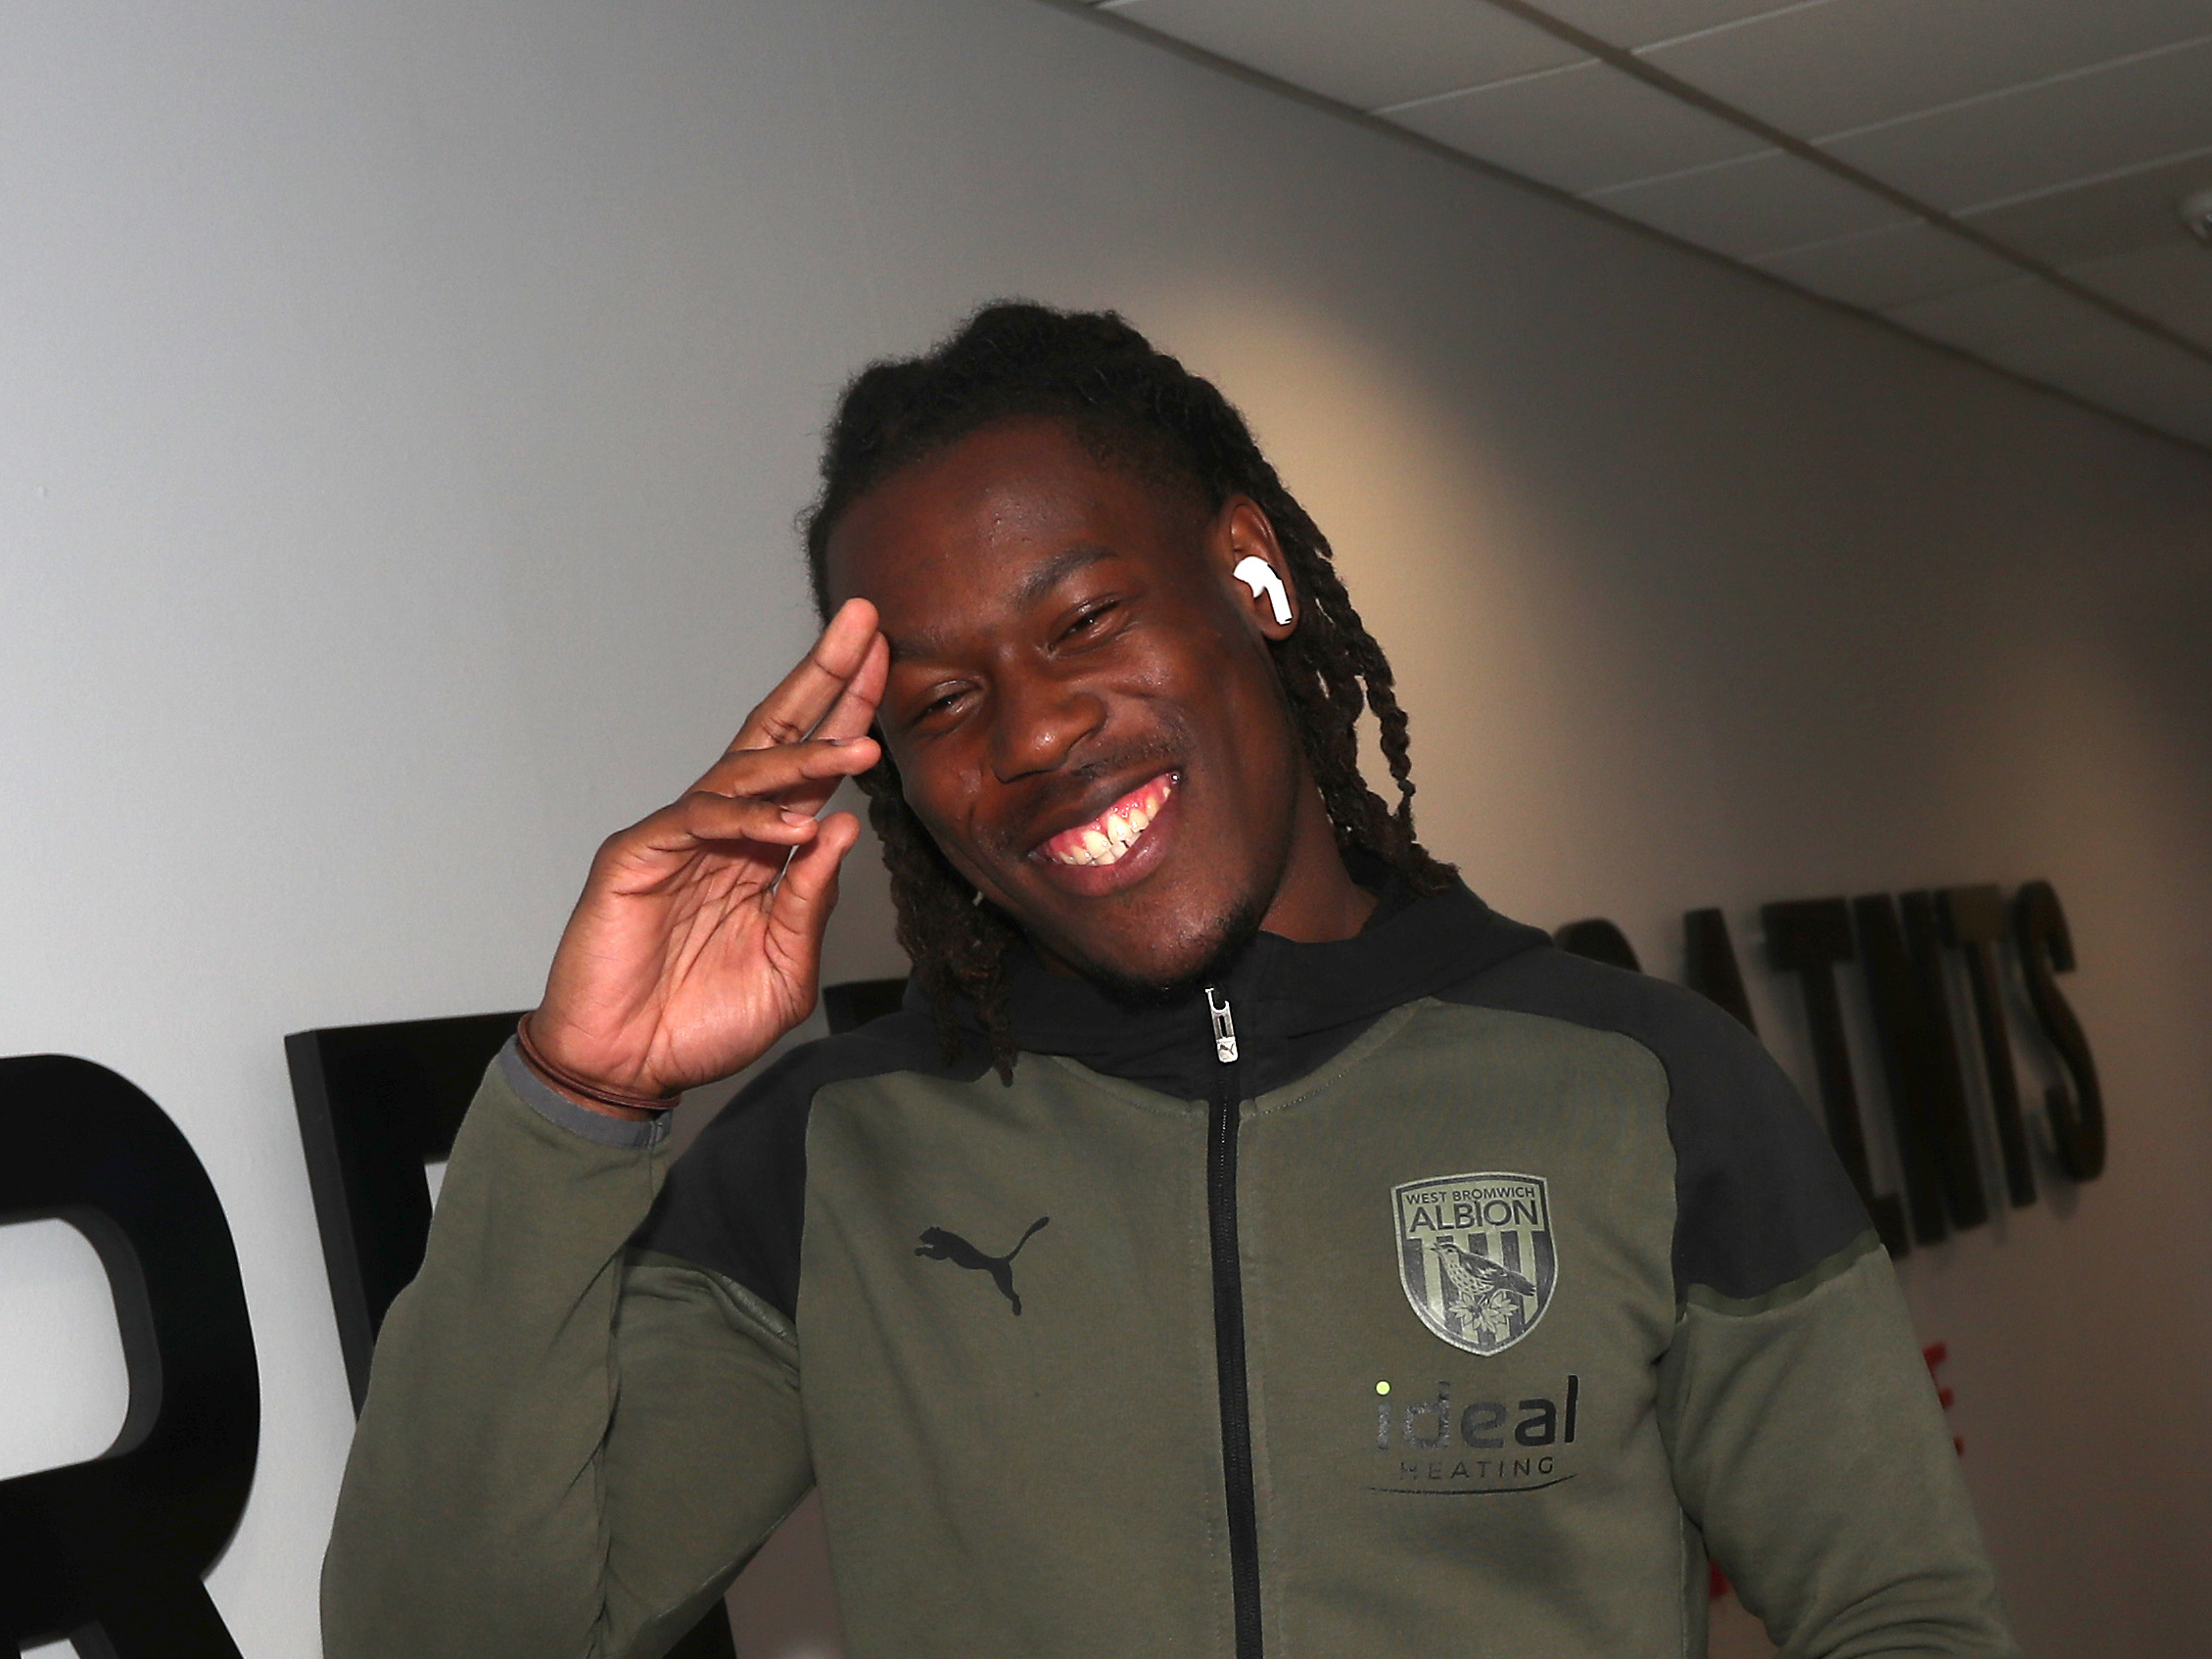 Brandon Thomas-Asante smiling at the camera as he arrives for a game wearing his Albion tracksuit 